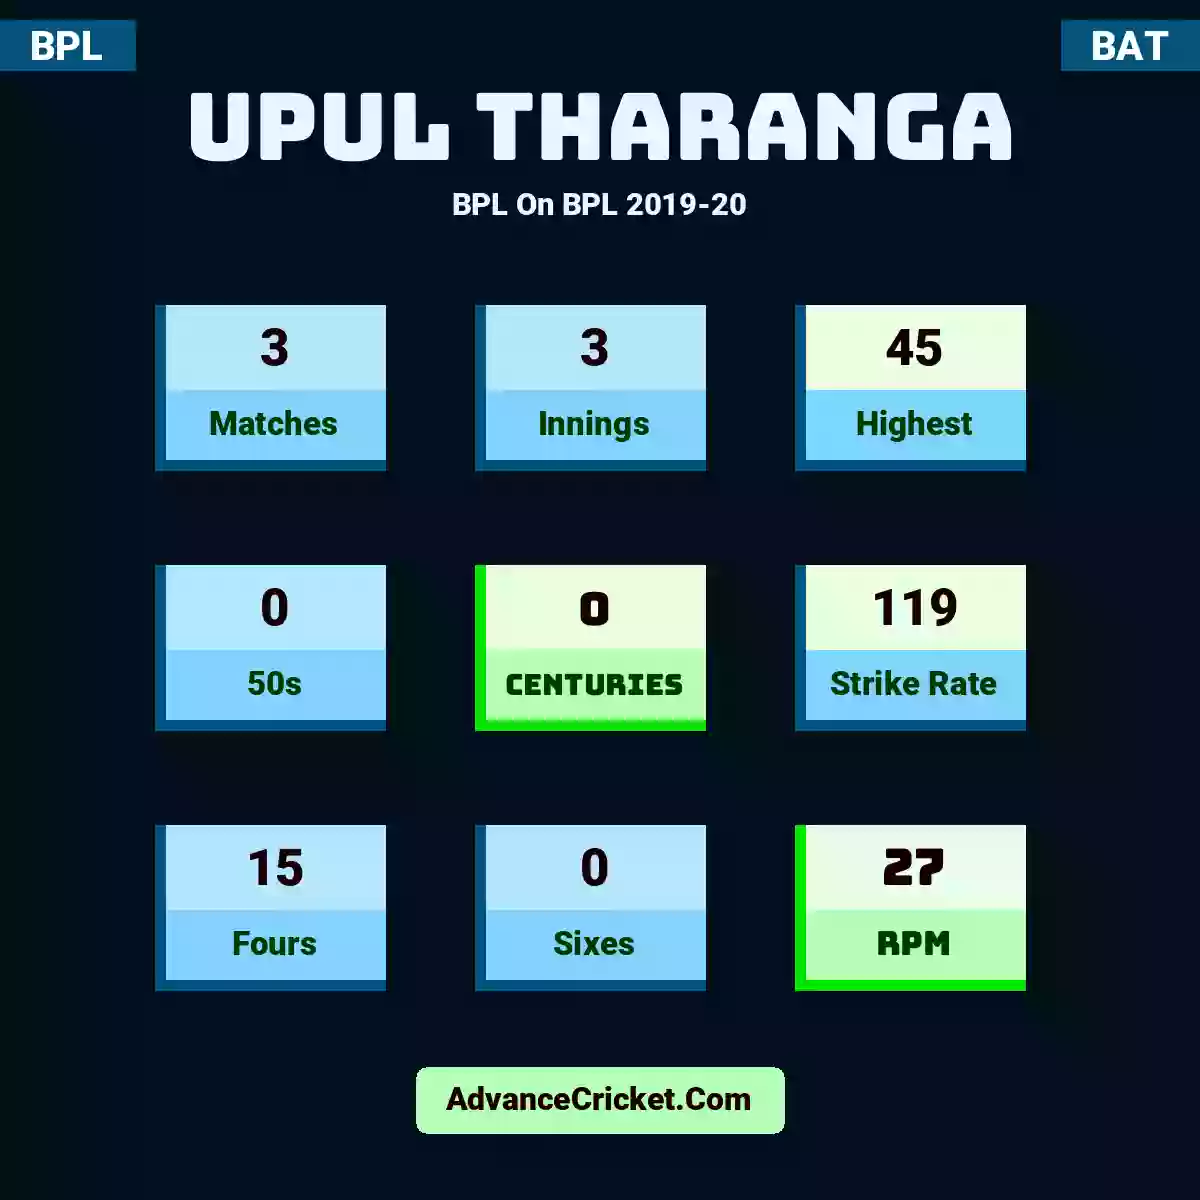 Upul Tharanga BPL  On BPL 2019-20, Upul Tharanga played 3 matches, scored 45 runs as highest, 0 half-centuries, and 0 centuries, with a strike rate of 119. U.Tharanga hit 15 fours and 0 sixes, with an RPM of 27.